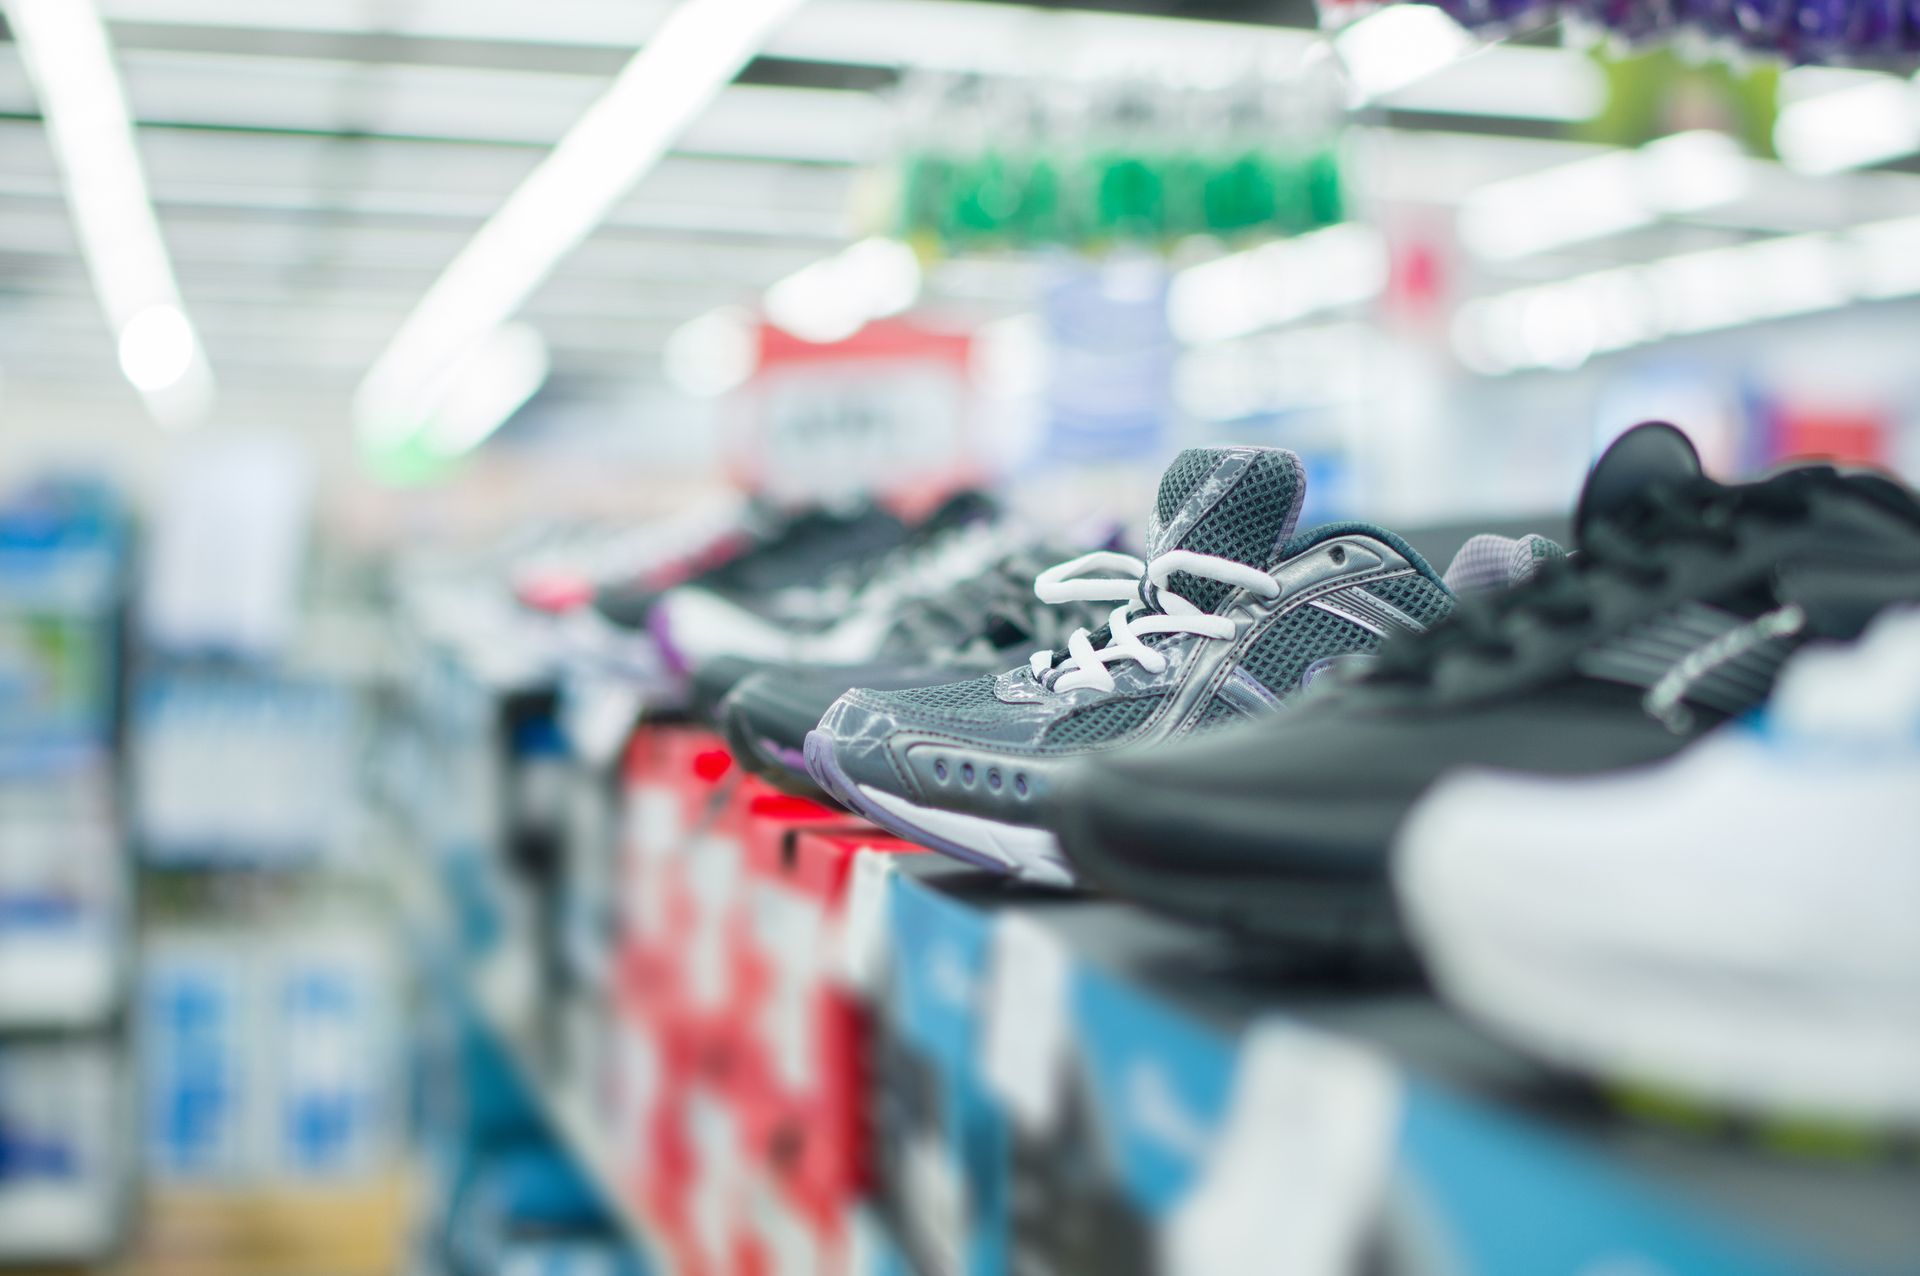 Footwear Warehousing: 5 Facts About Improving Efficiency